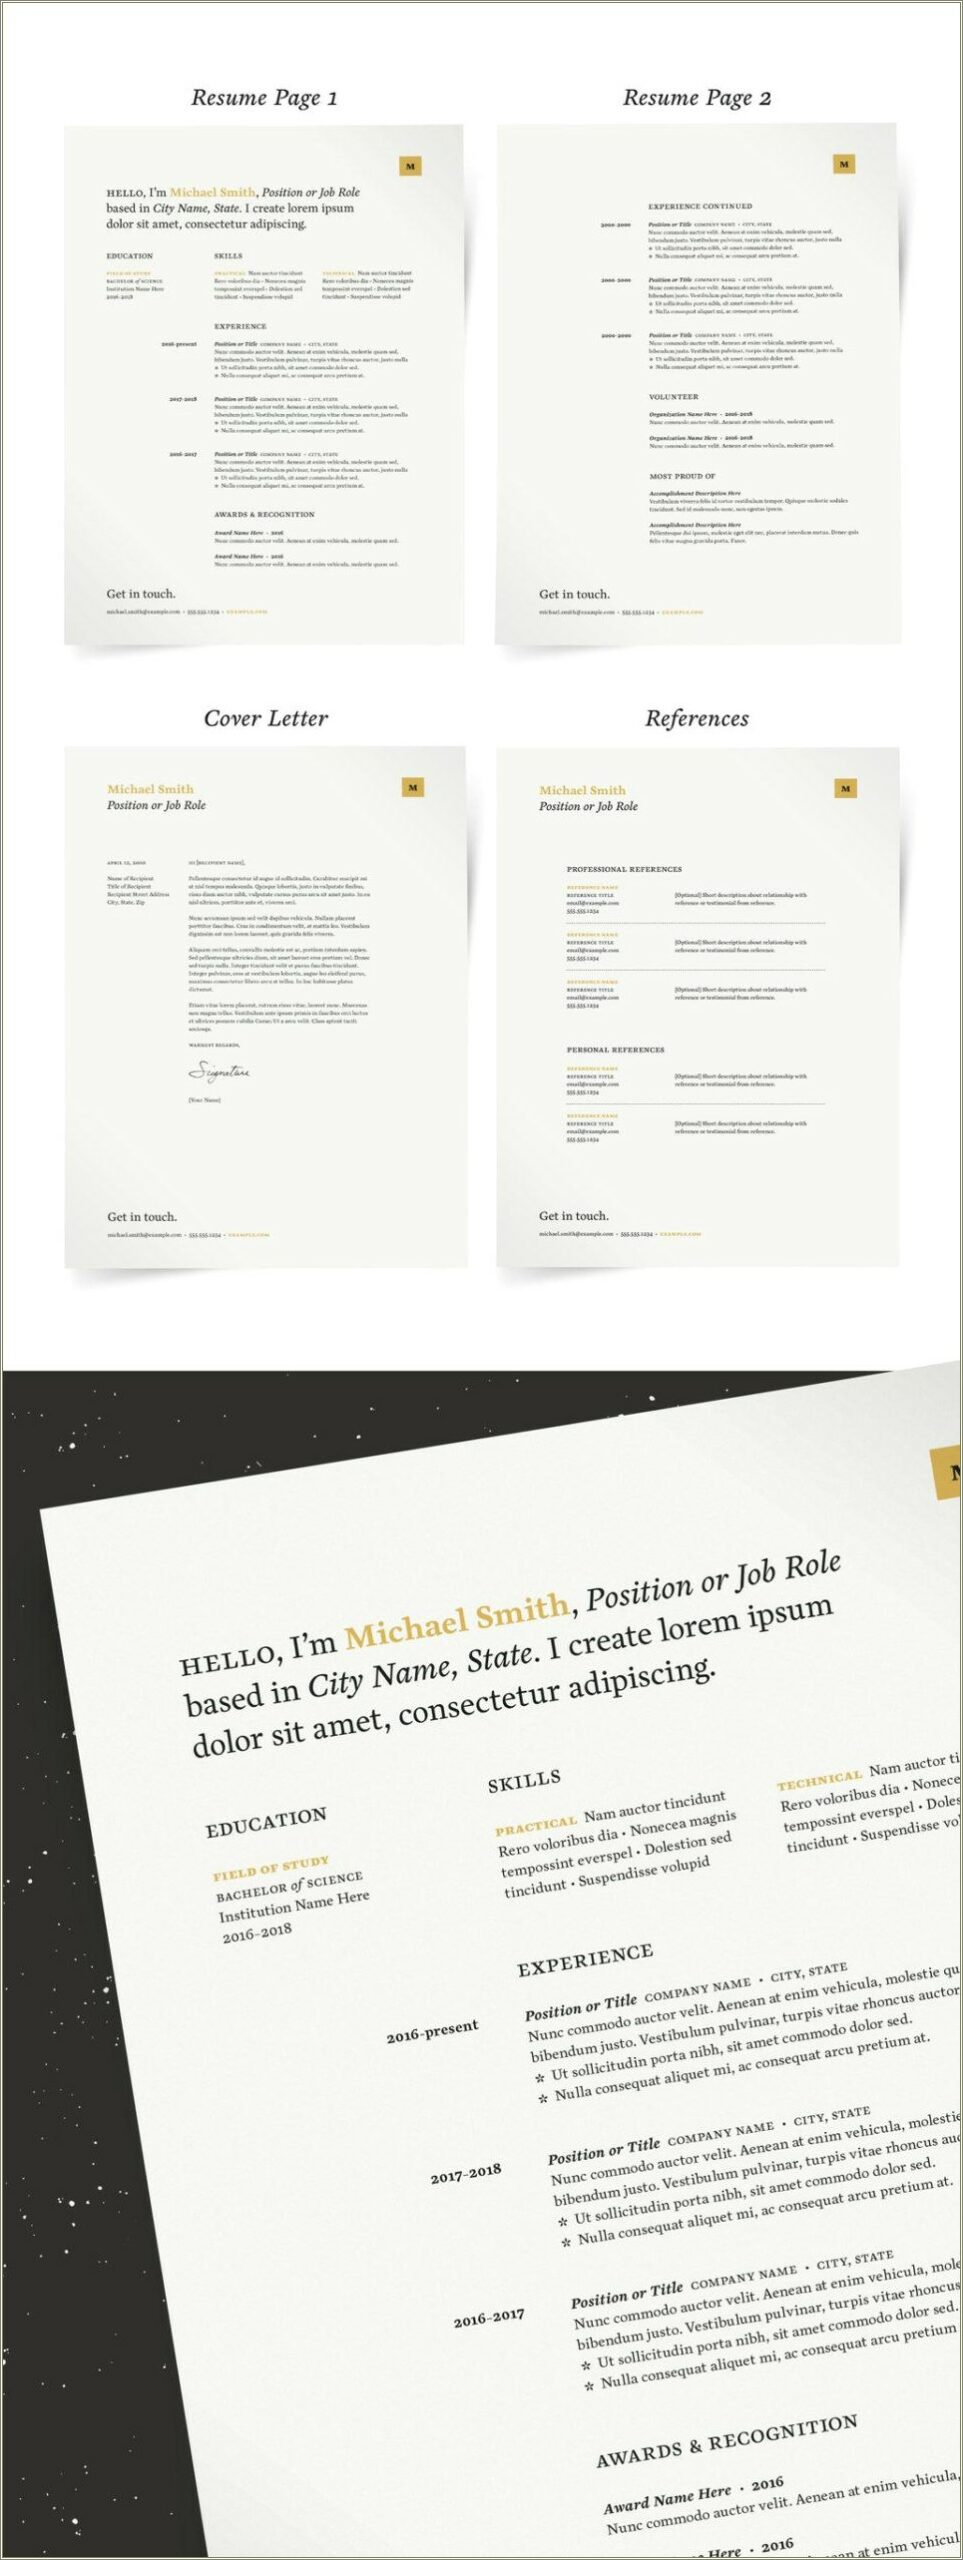 Attractive Resume Templates For Freshers Free Download